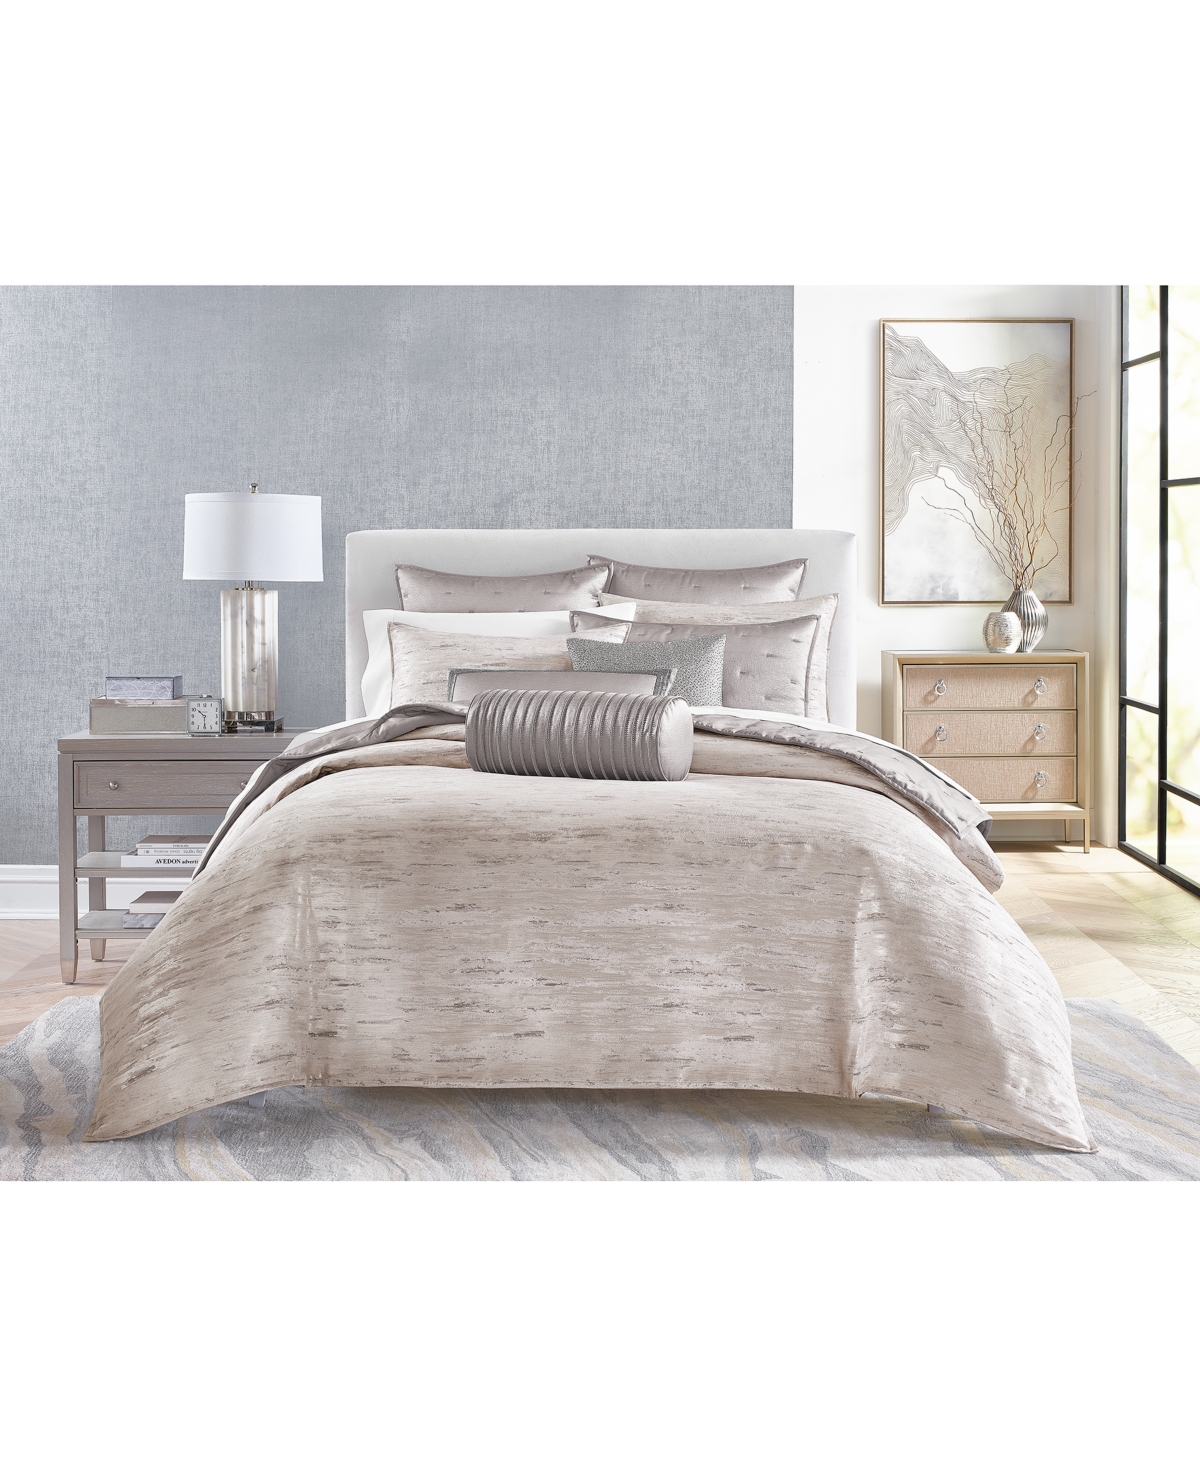 Hotel Collection Impasto Stone 3-pc. Comforter Set, Full/queen, Created For Macy's In Grey